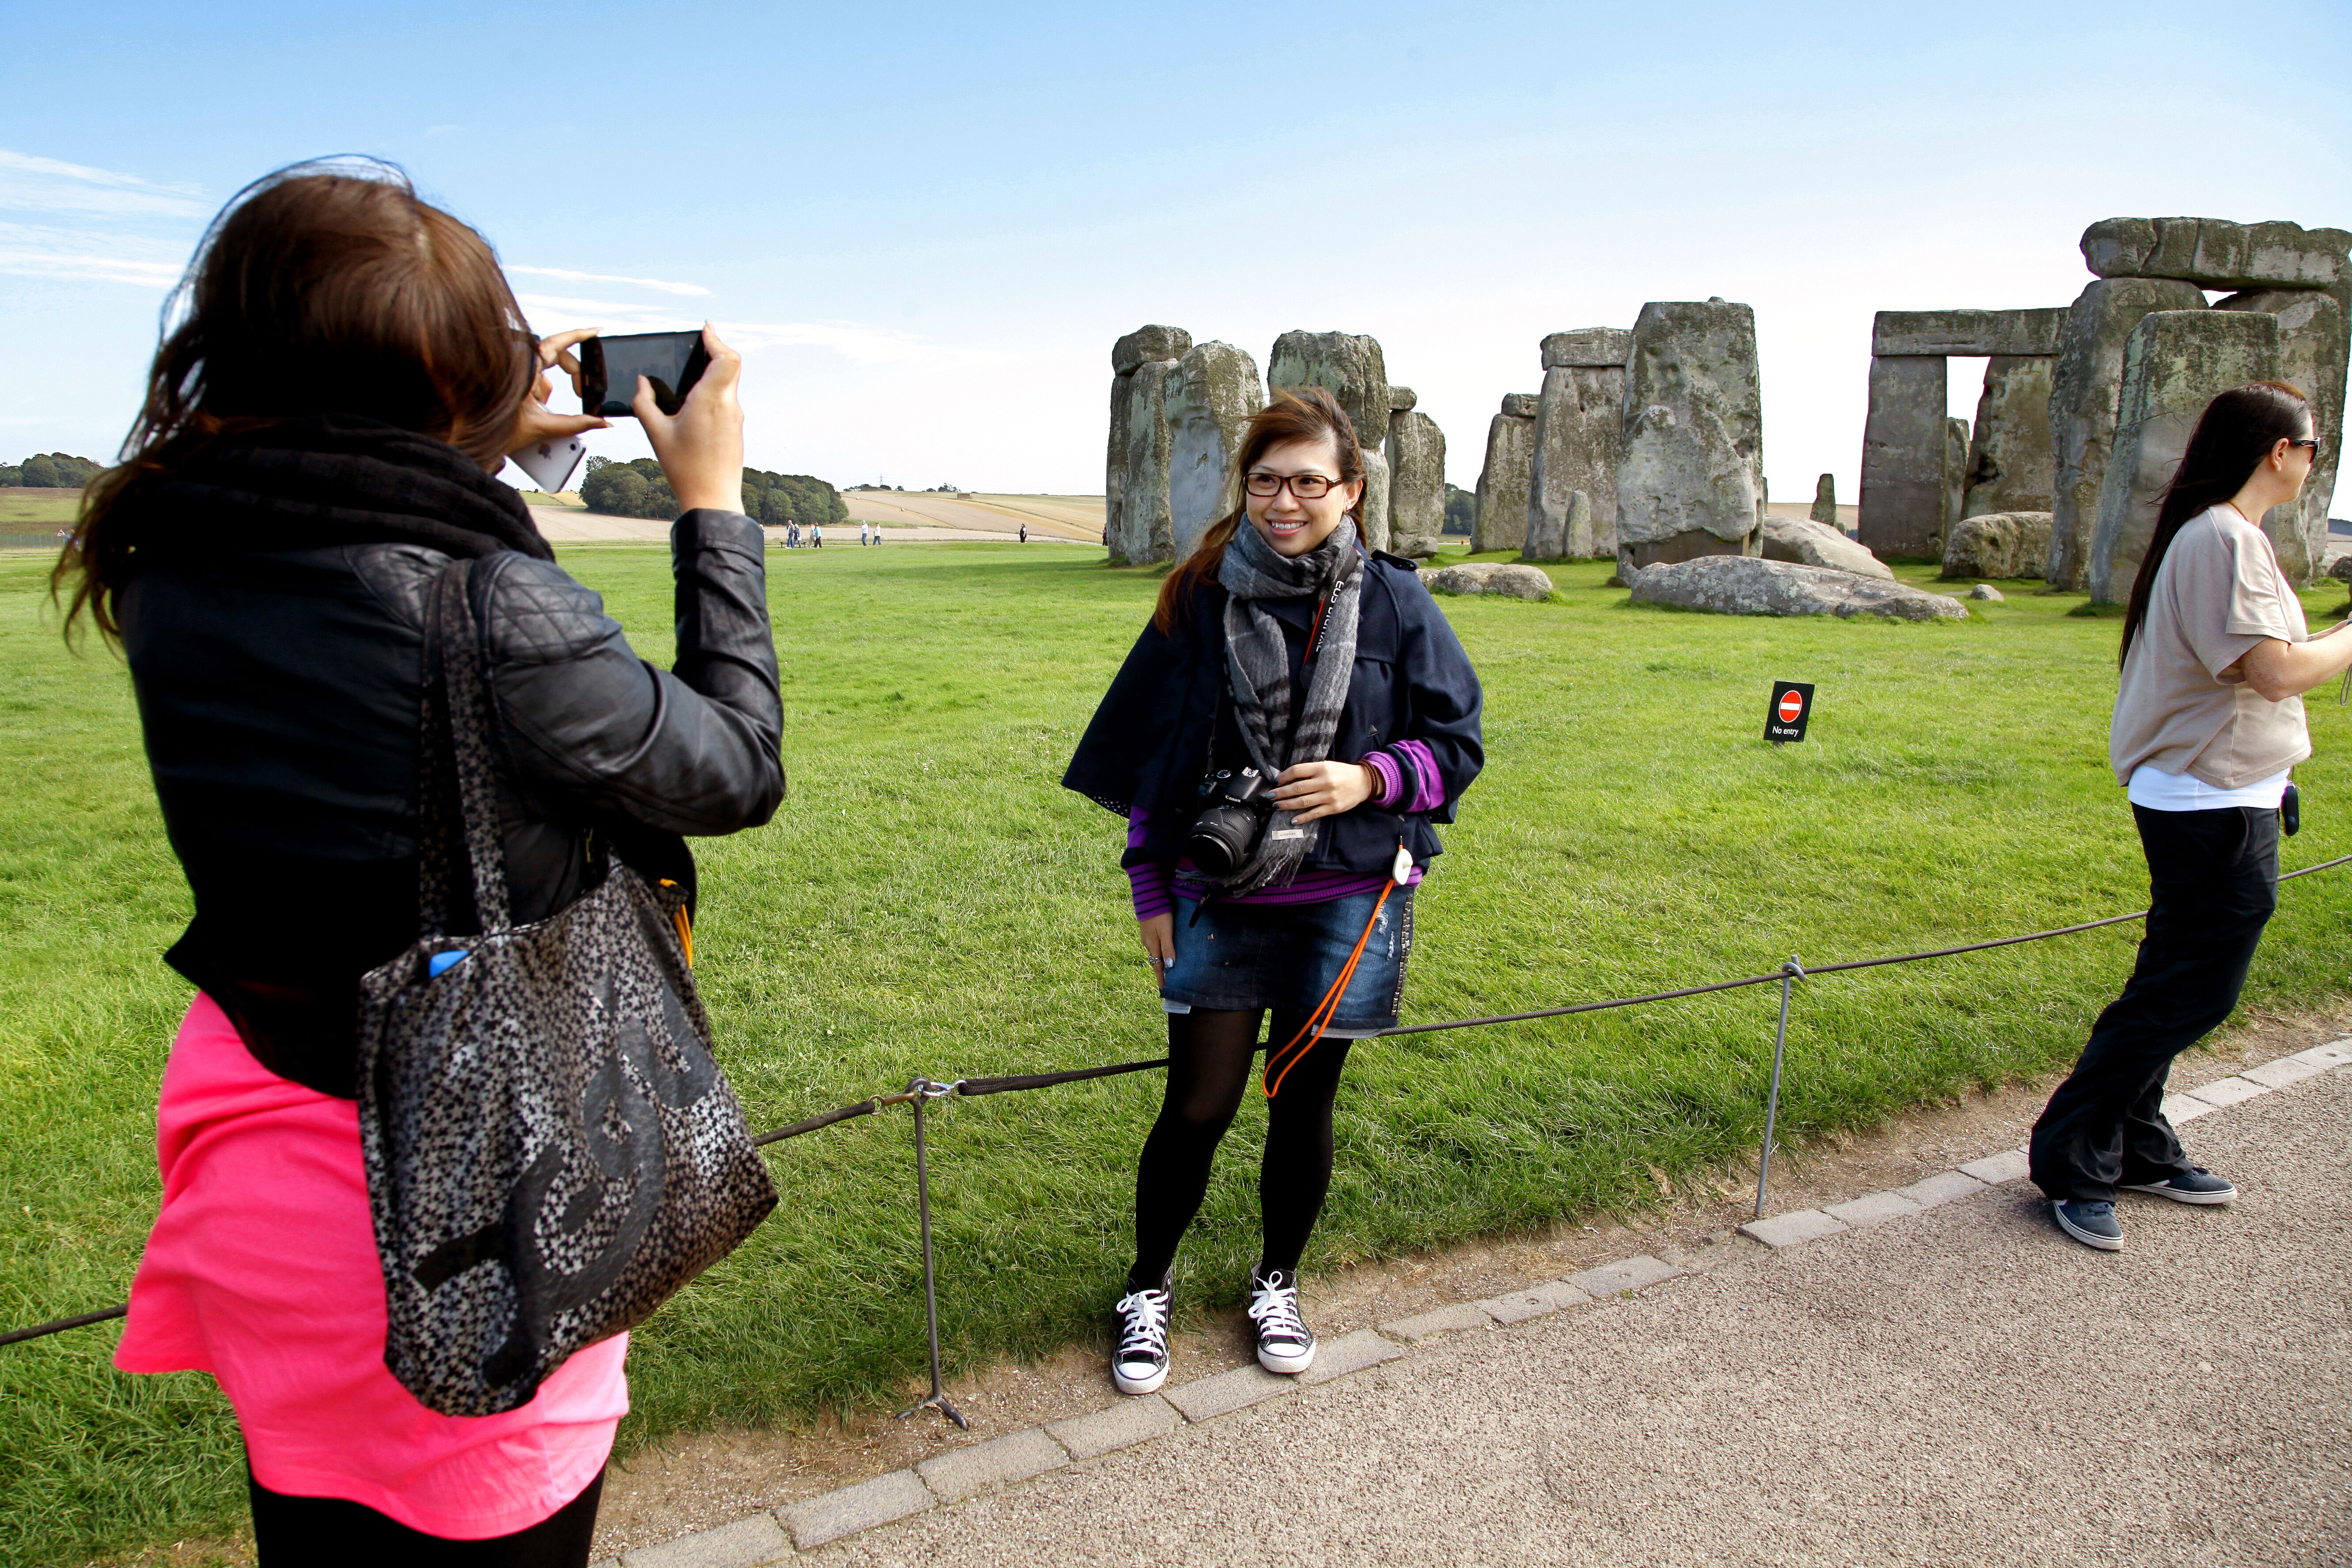 England In One Day - Stonehenge, Bath, Stratford & The Cotswolds